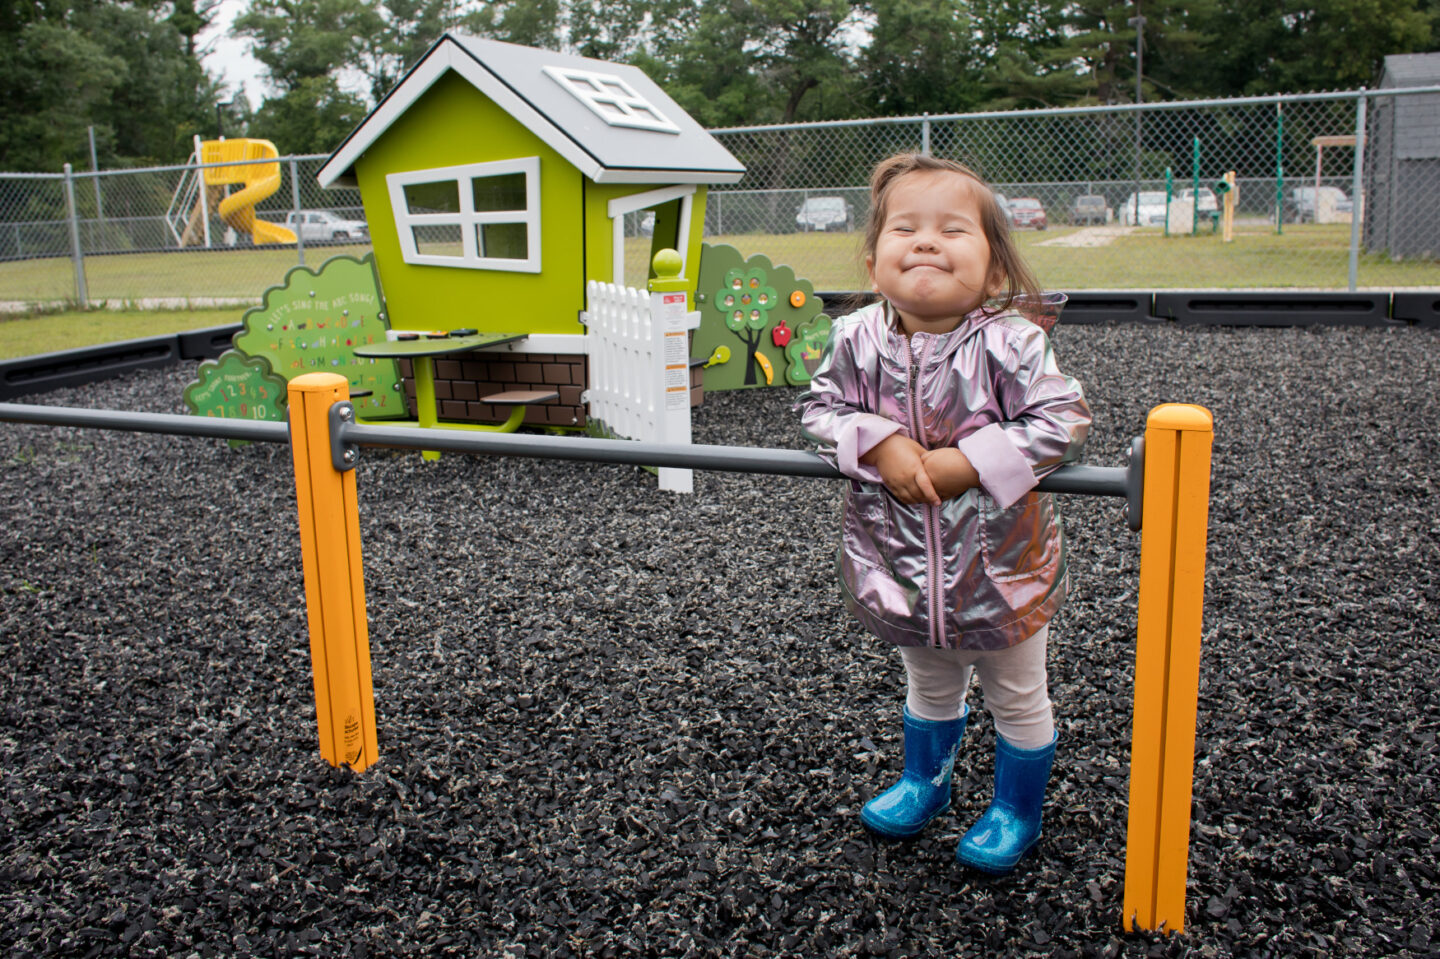 A young child smiles standing on a playground